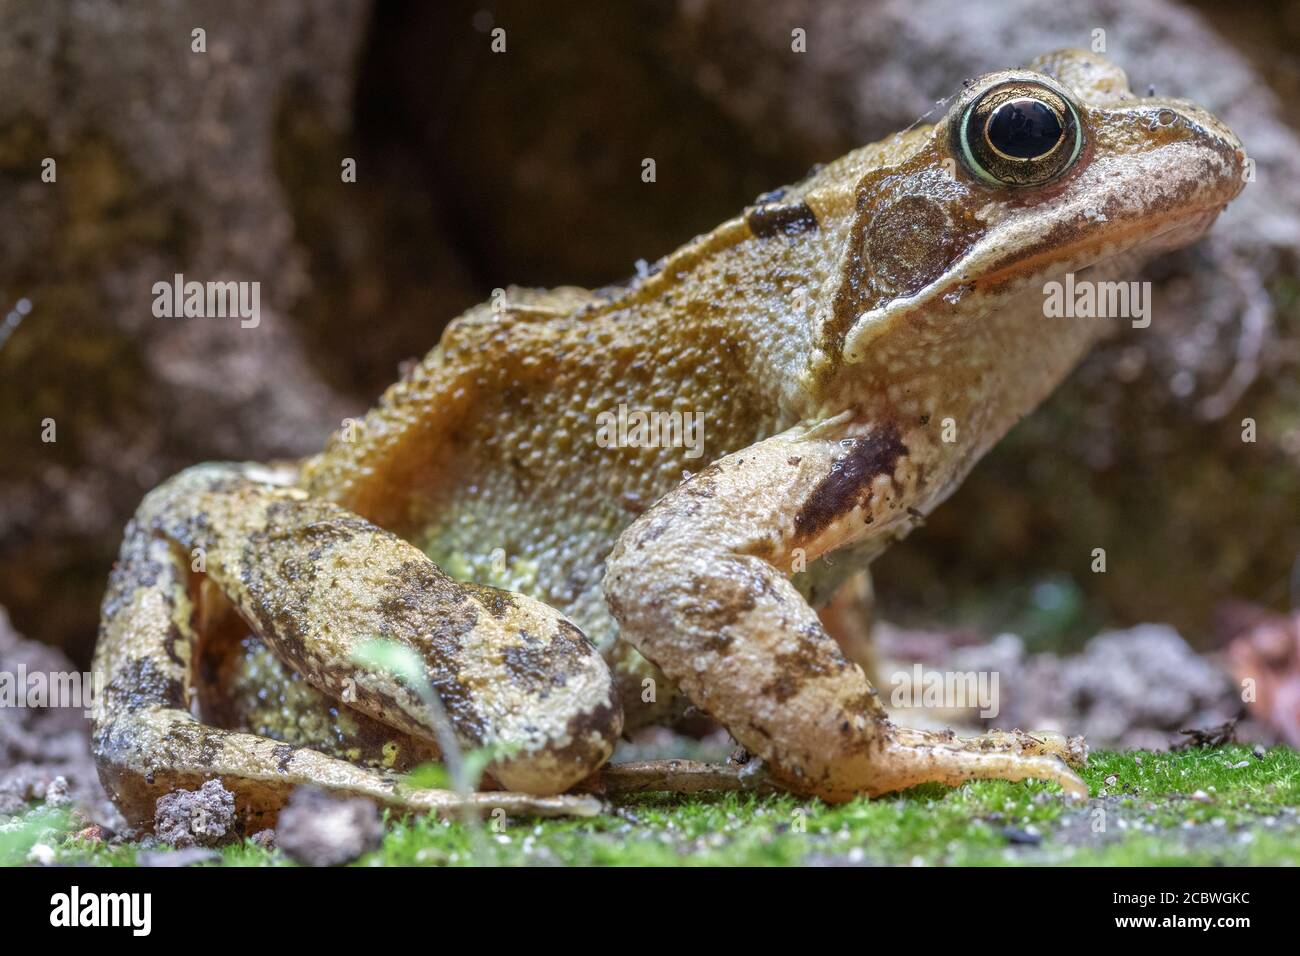 Closeup image of a stationary frog in amongst the stones Stock Photo